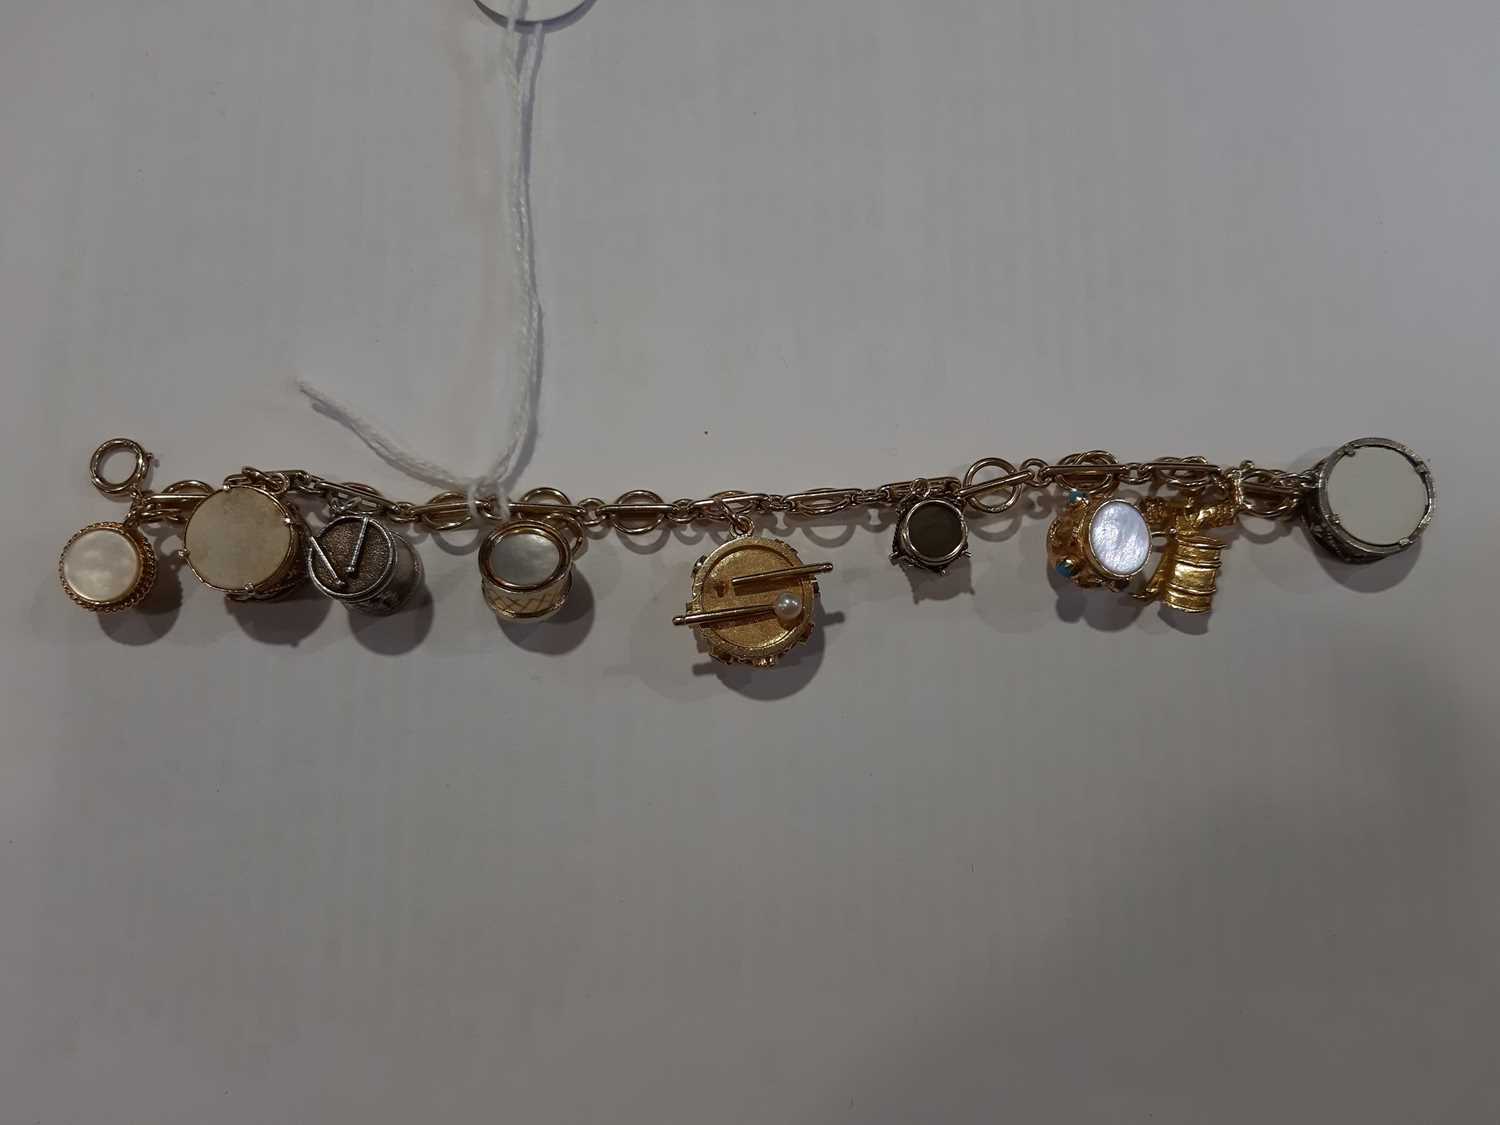 Two 9 carat yellow gold charm bracelets with charms of mixed metals and standards. - Image 5 of 7